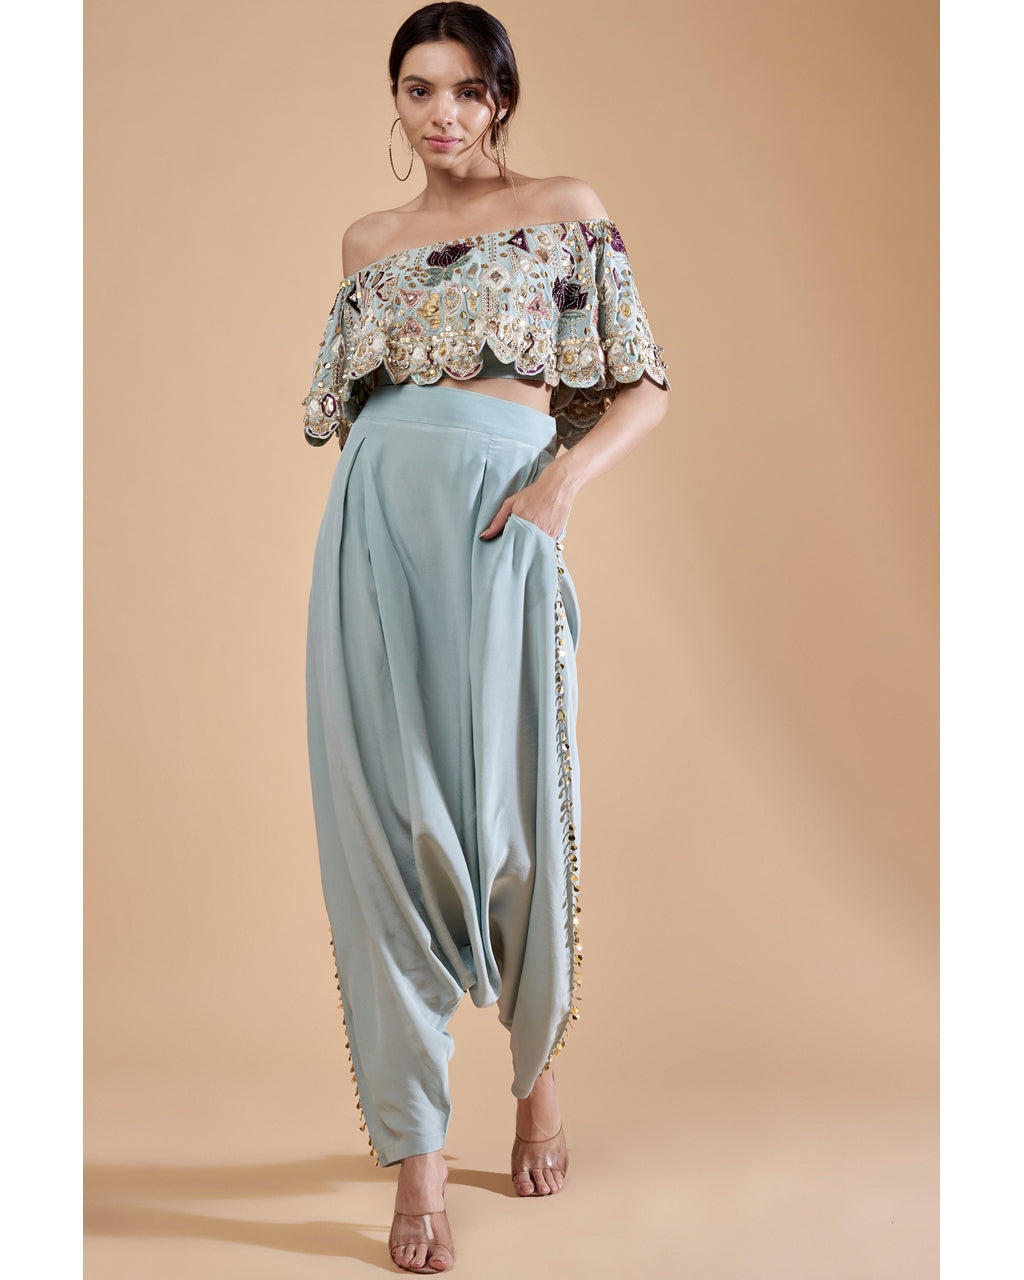 Powder Blue Top With Low Crotch Pant